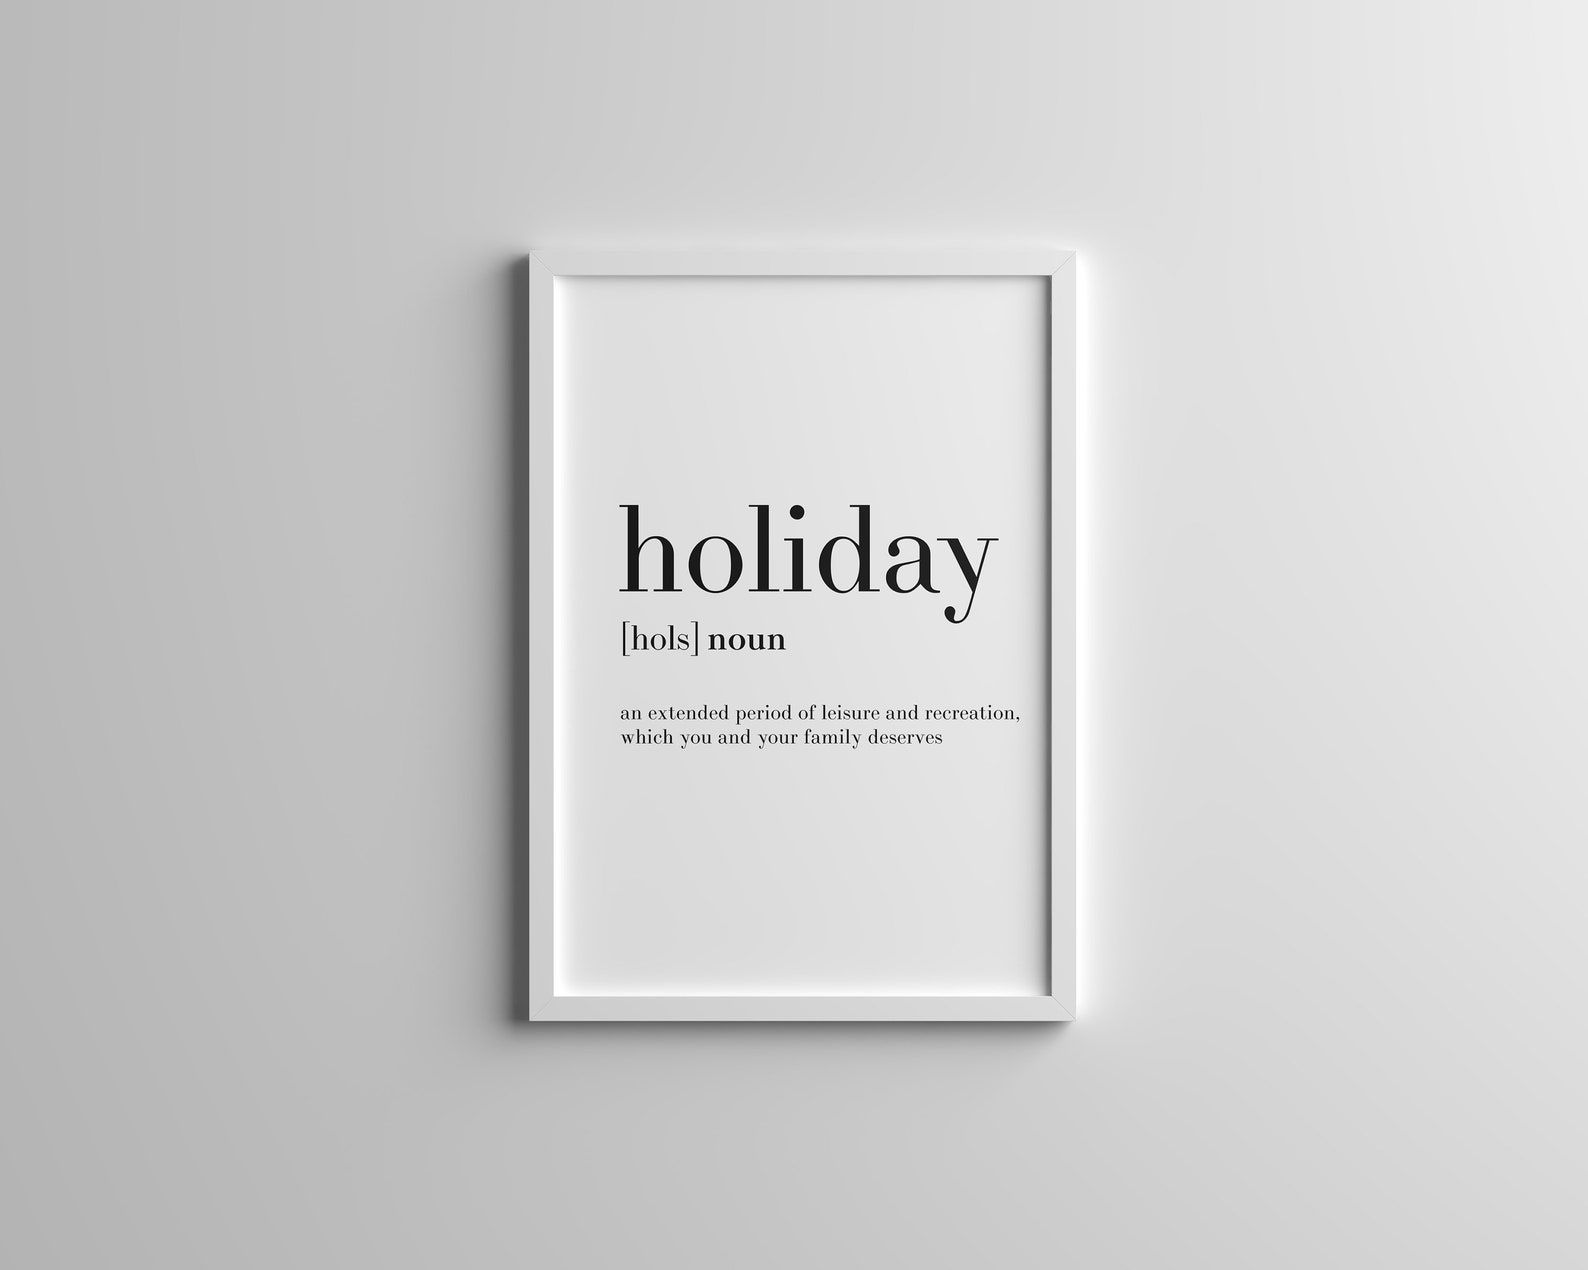 holiday-definition-wall-print-holiday-noun-poster-definition-etsy